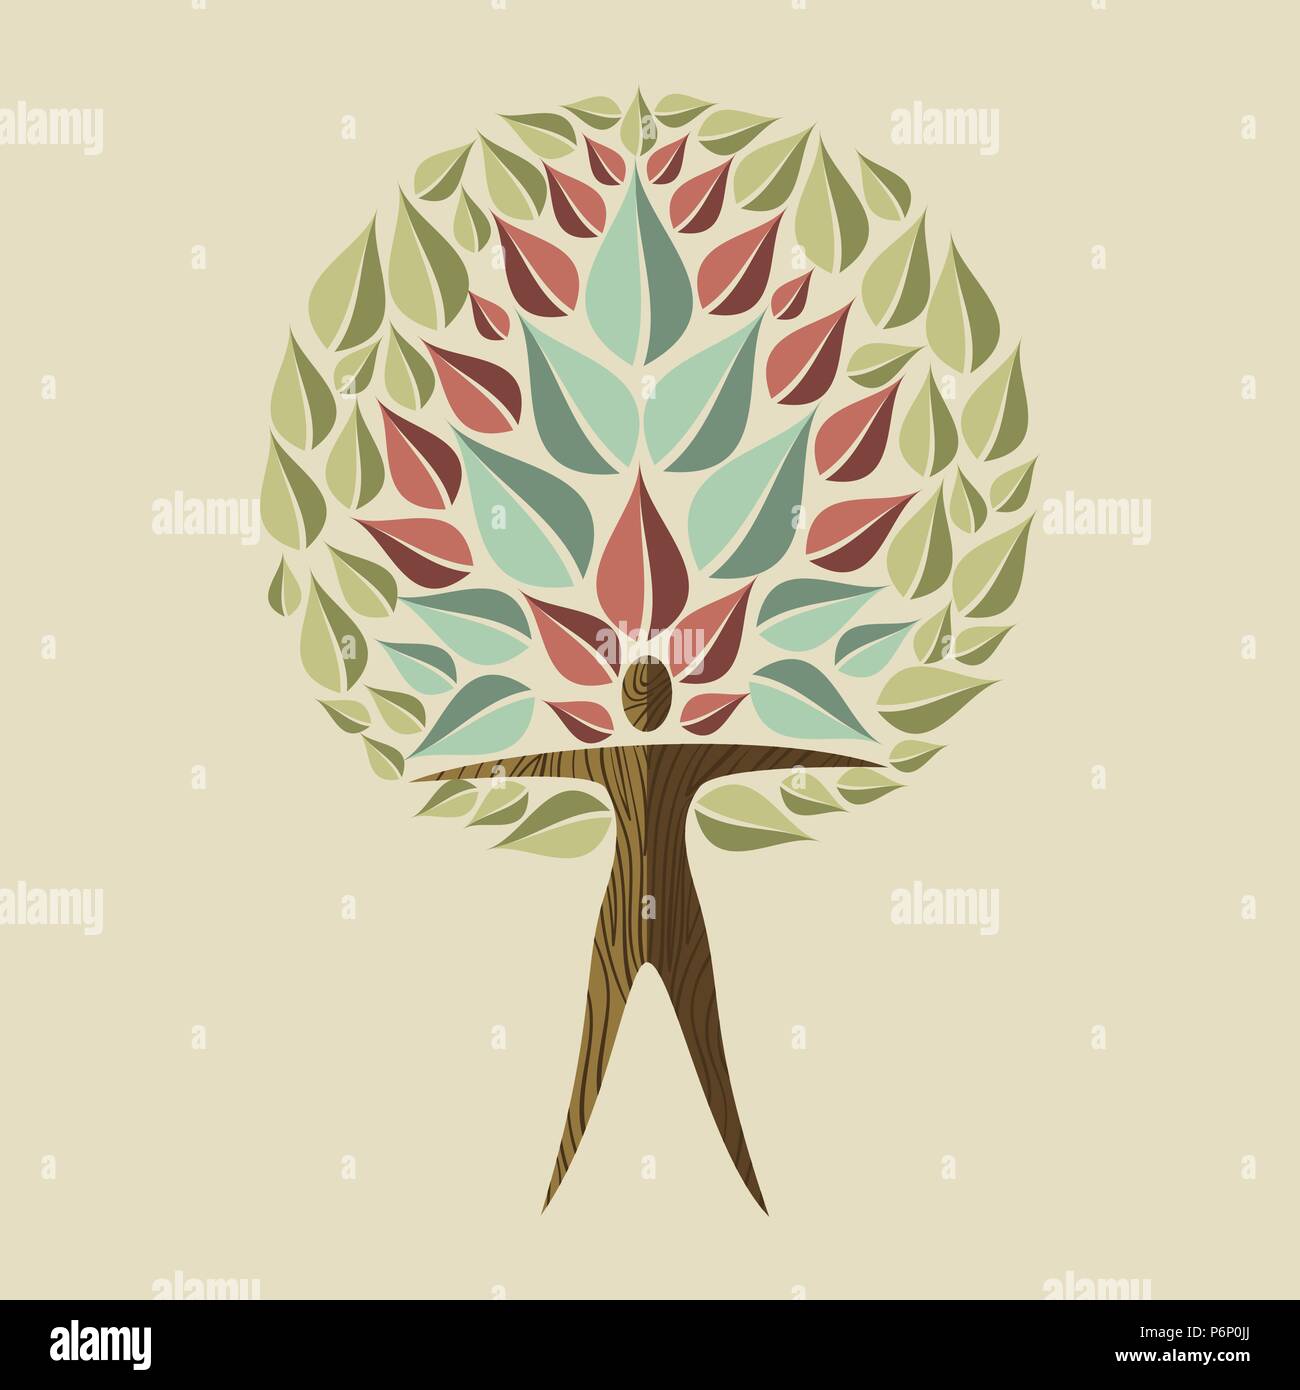 Yoga tree concept illustration. Woman meditating in peaceful pose with nature decoration doing relaxation exercise. EPS10 vector. Stock Vector